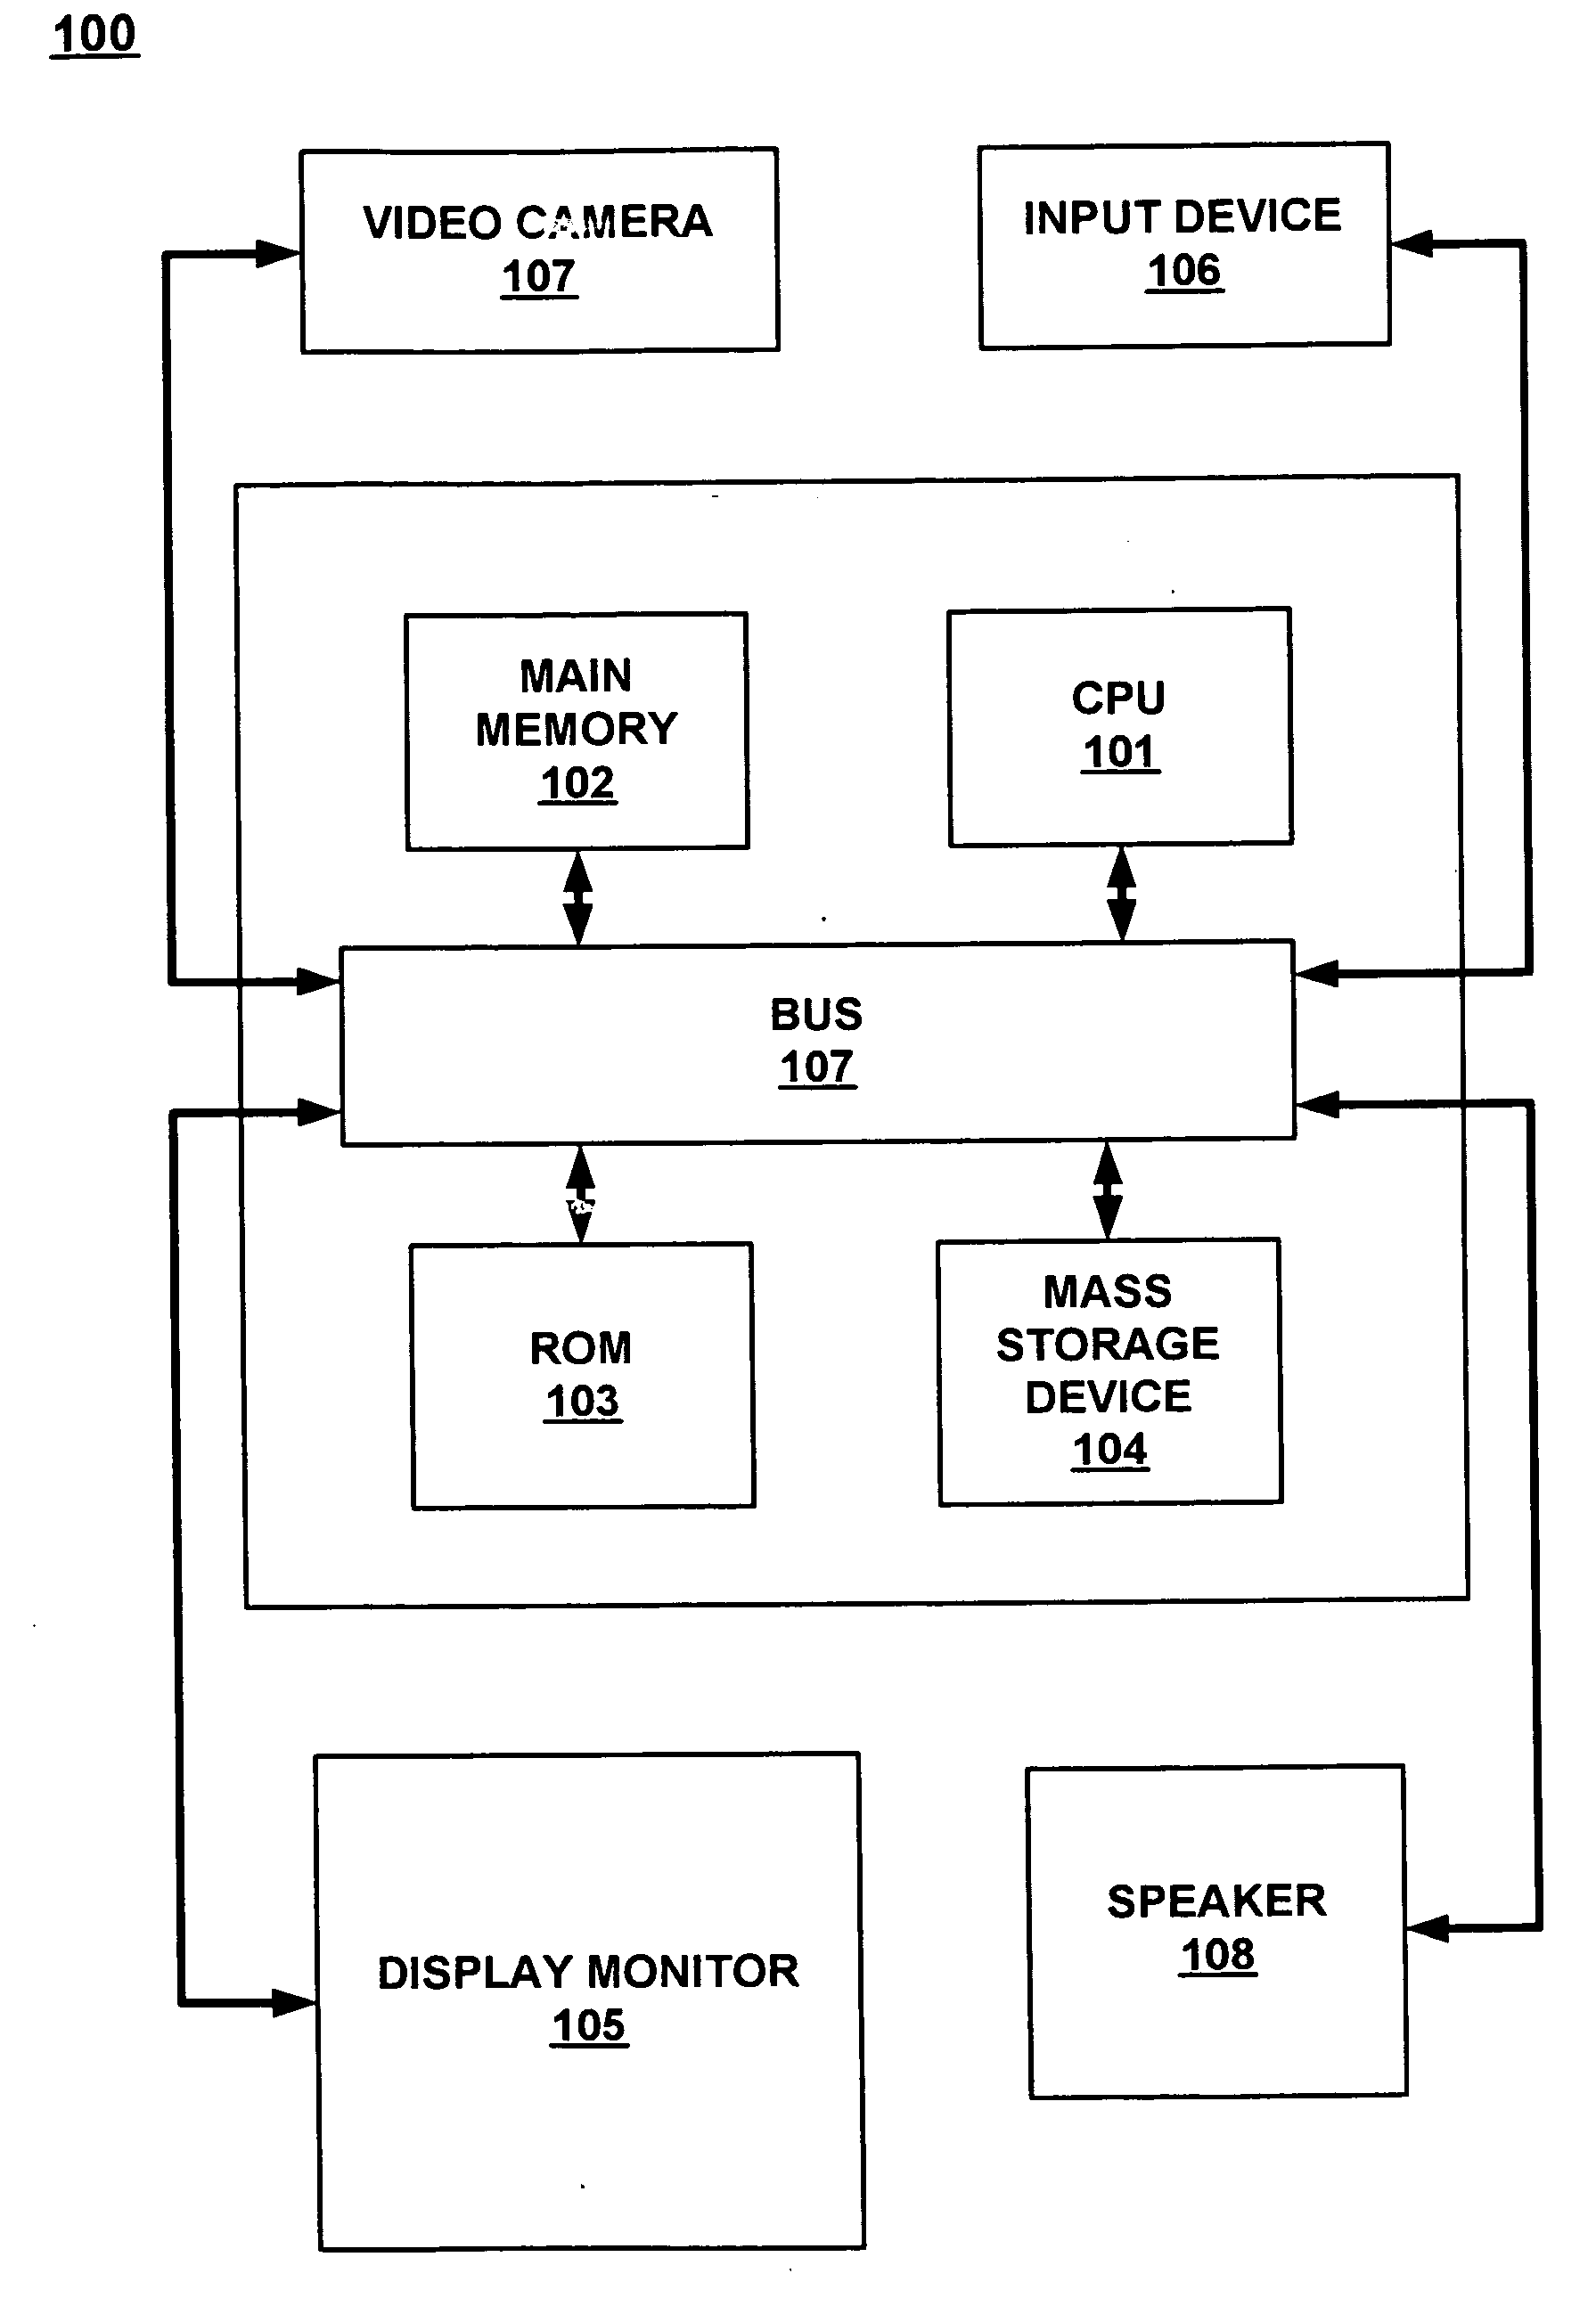 System and method of patching missing digital video packets communicated in an IEEE 1394 compliant implementation